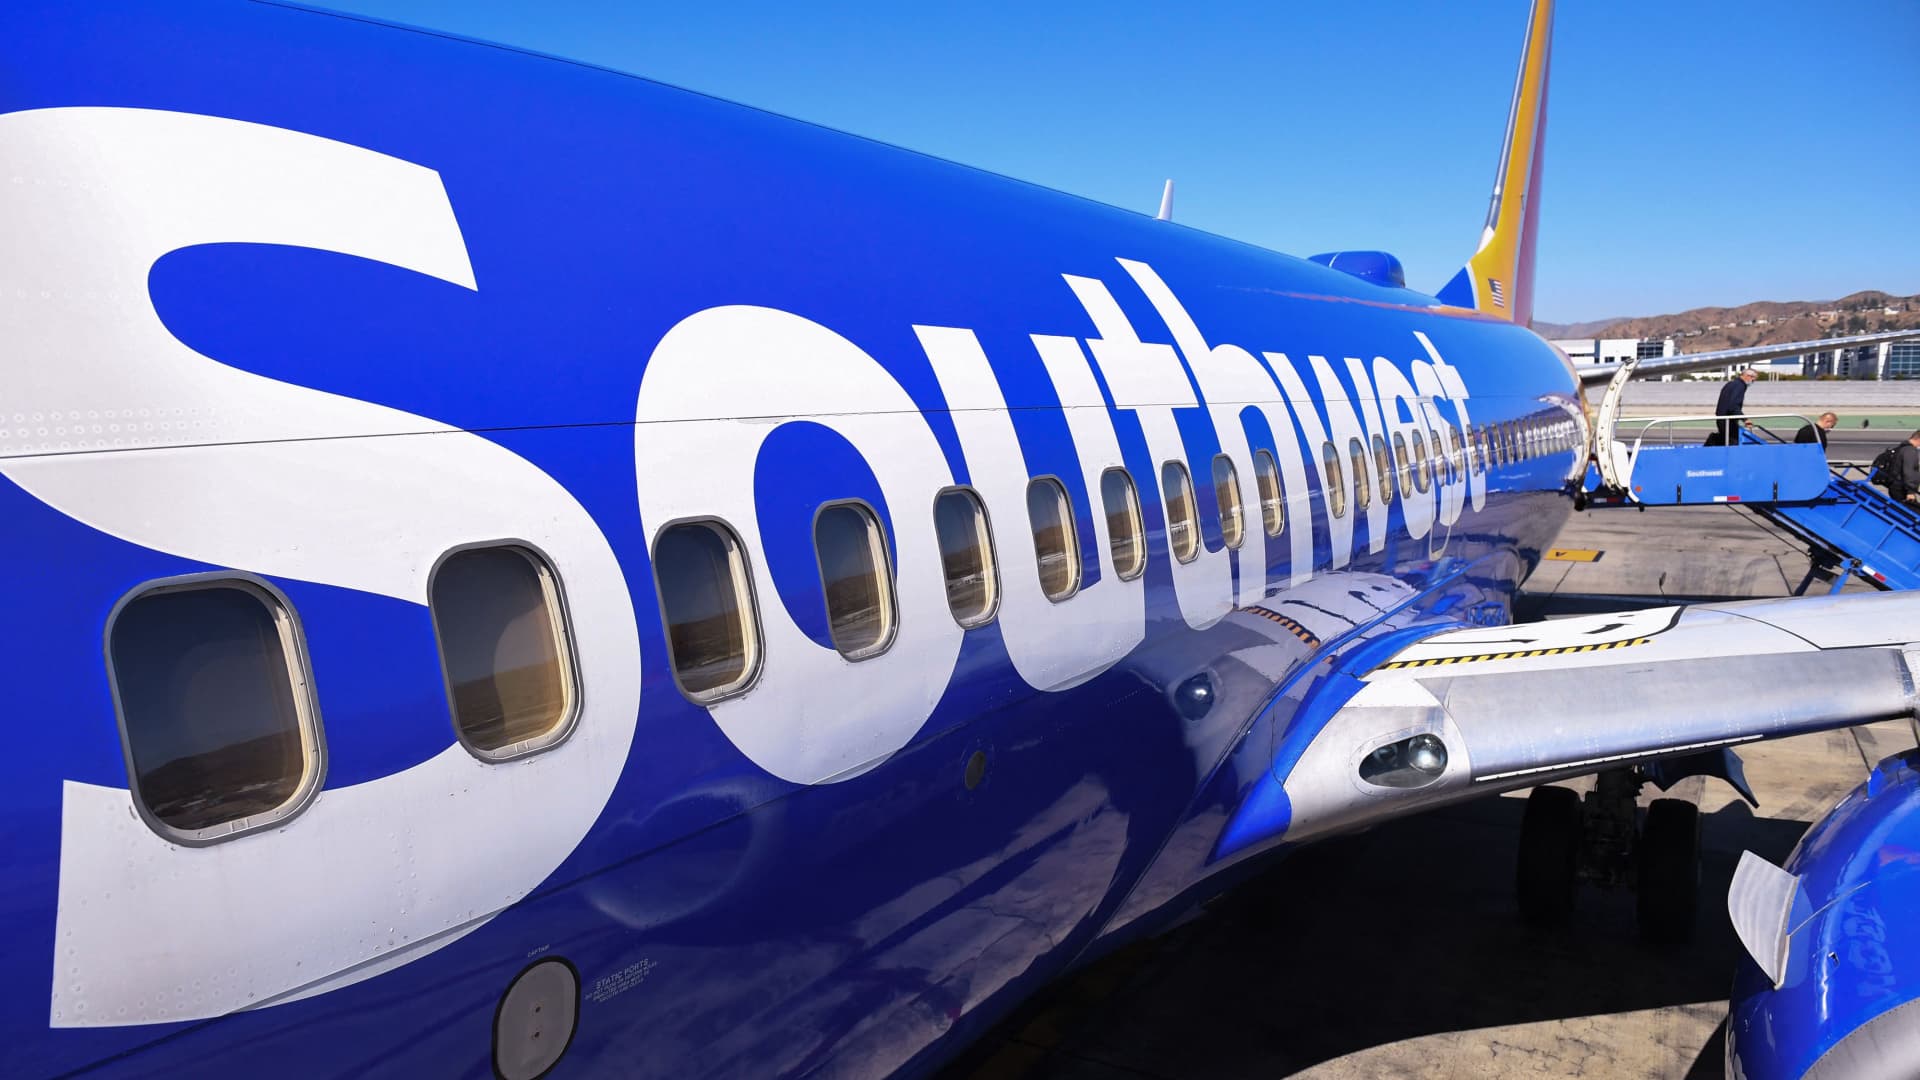 Southwest Airlines hired a record 3,000 flight attendants so far this year